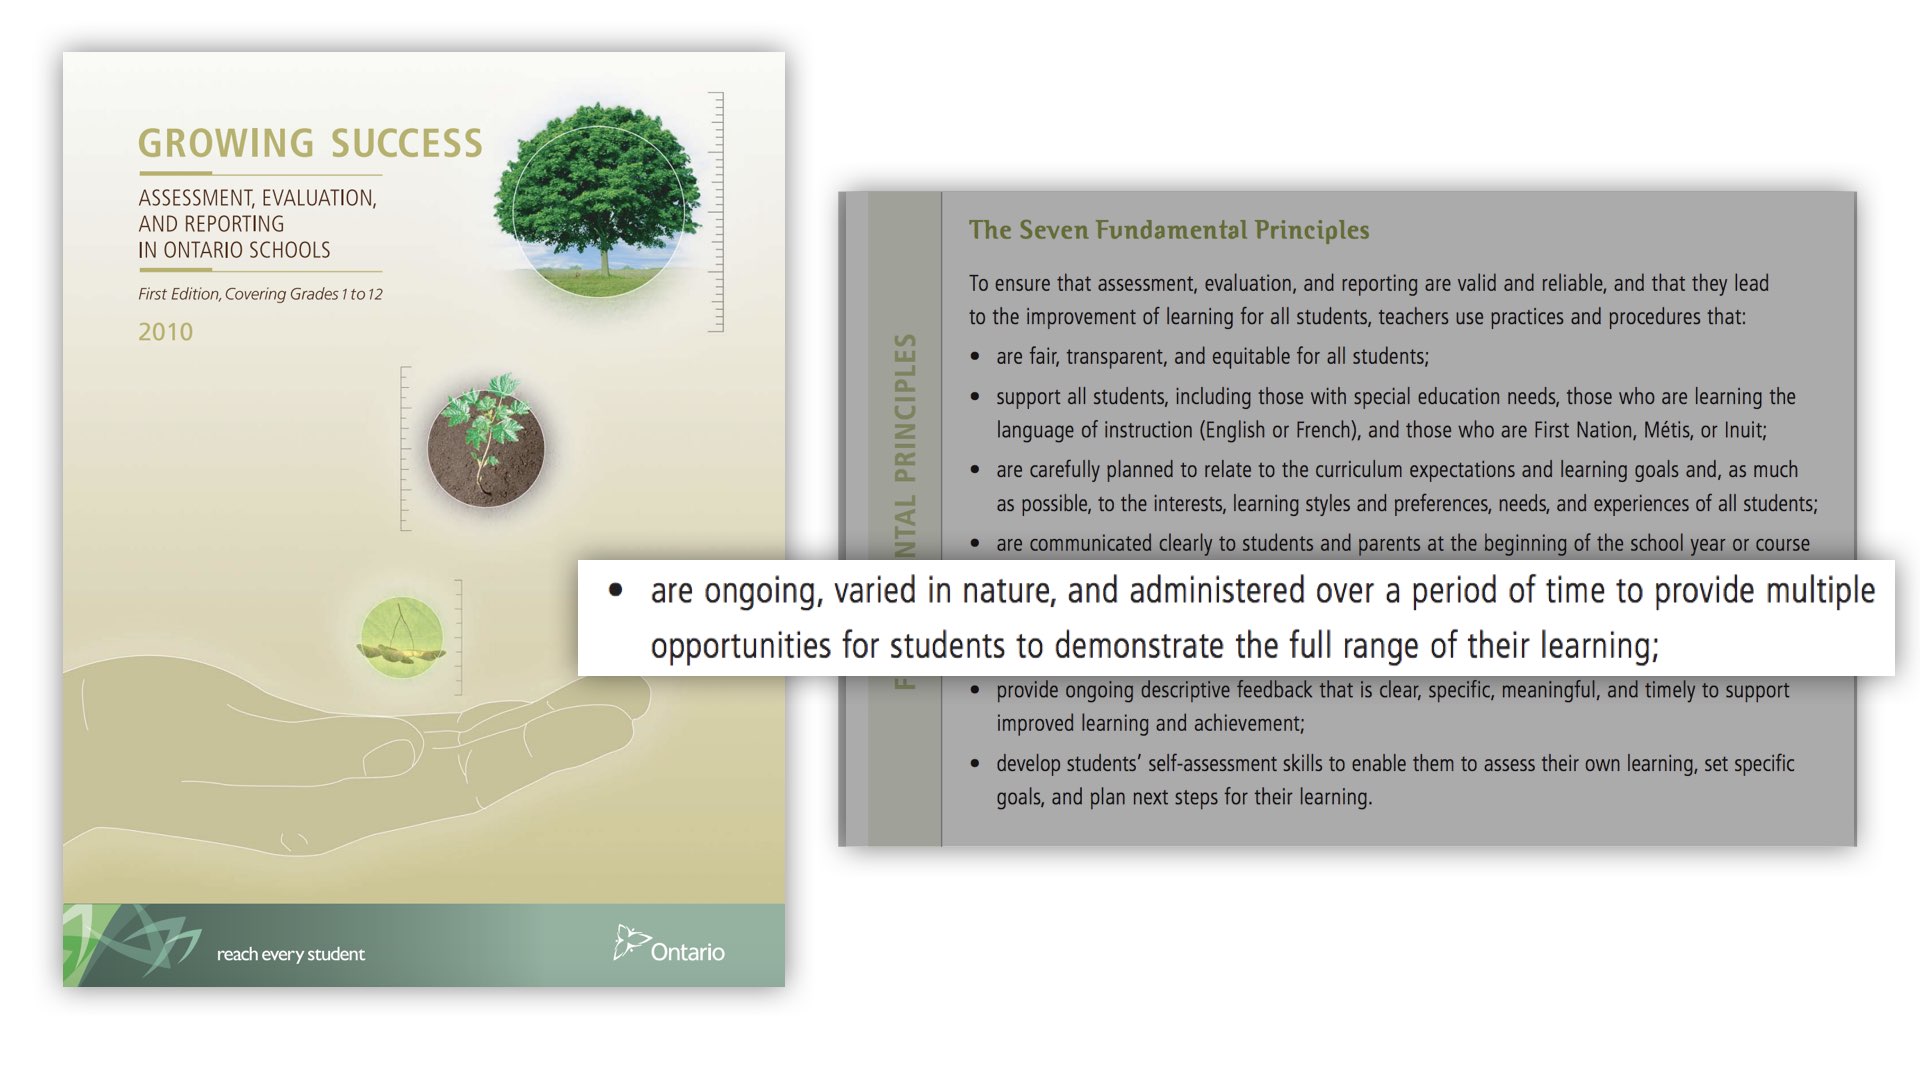 Spiralling Your Math Curriculum - Growing Success Document Assessment is Ongoing Varied in Nature Multiple Opportunities